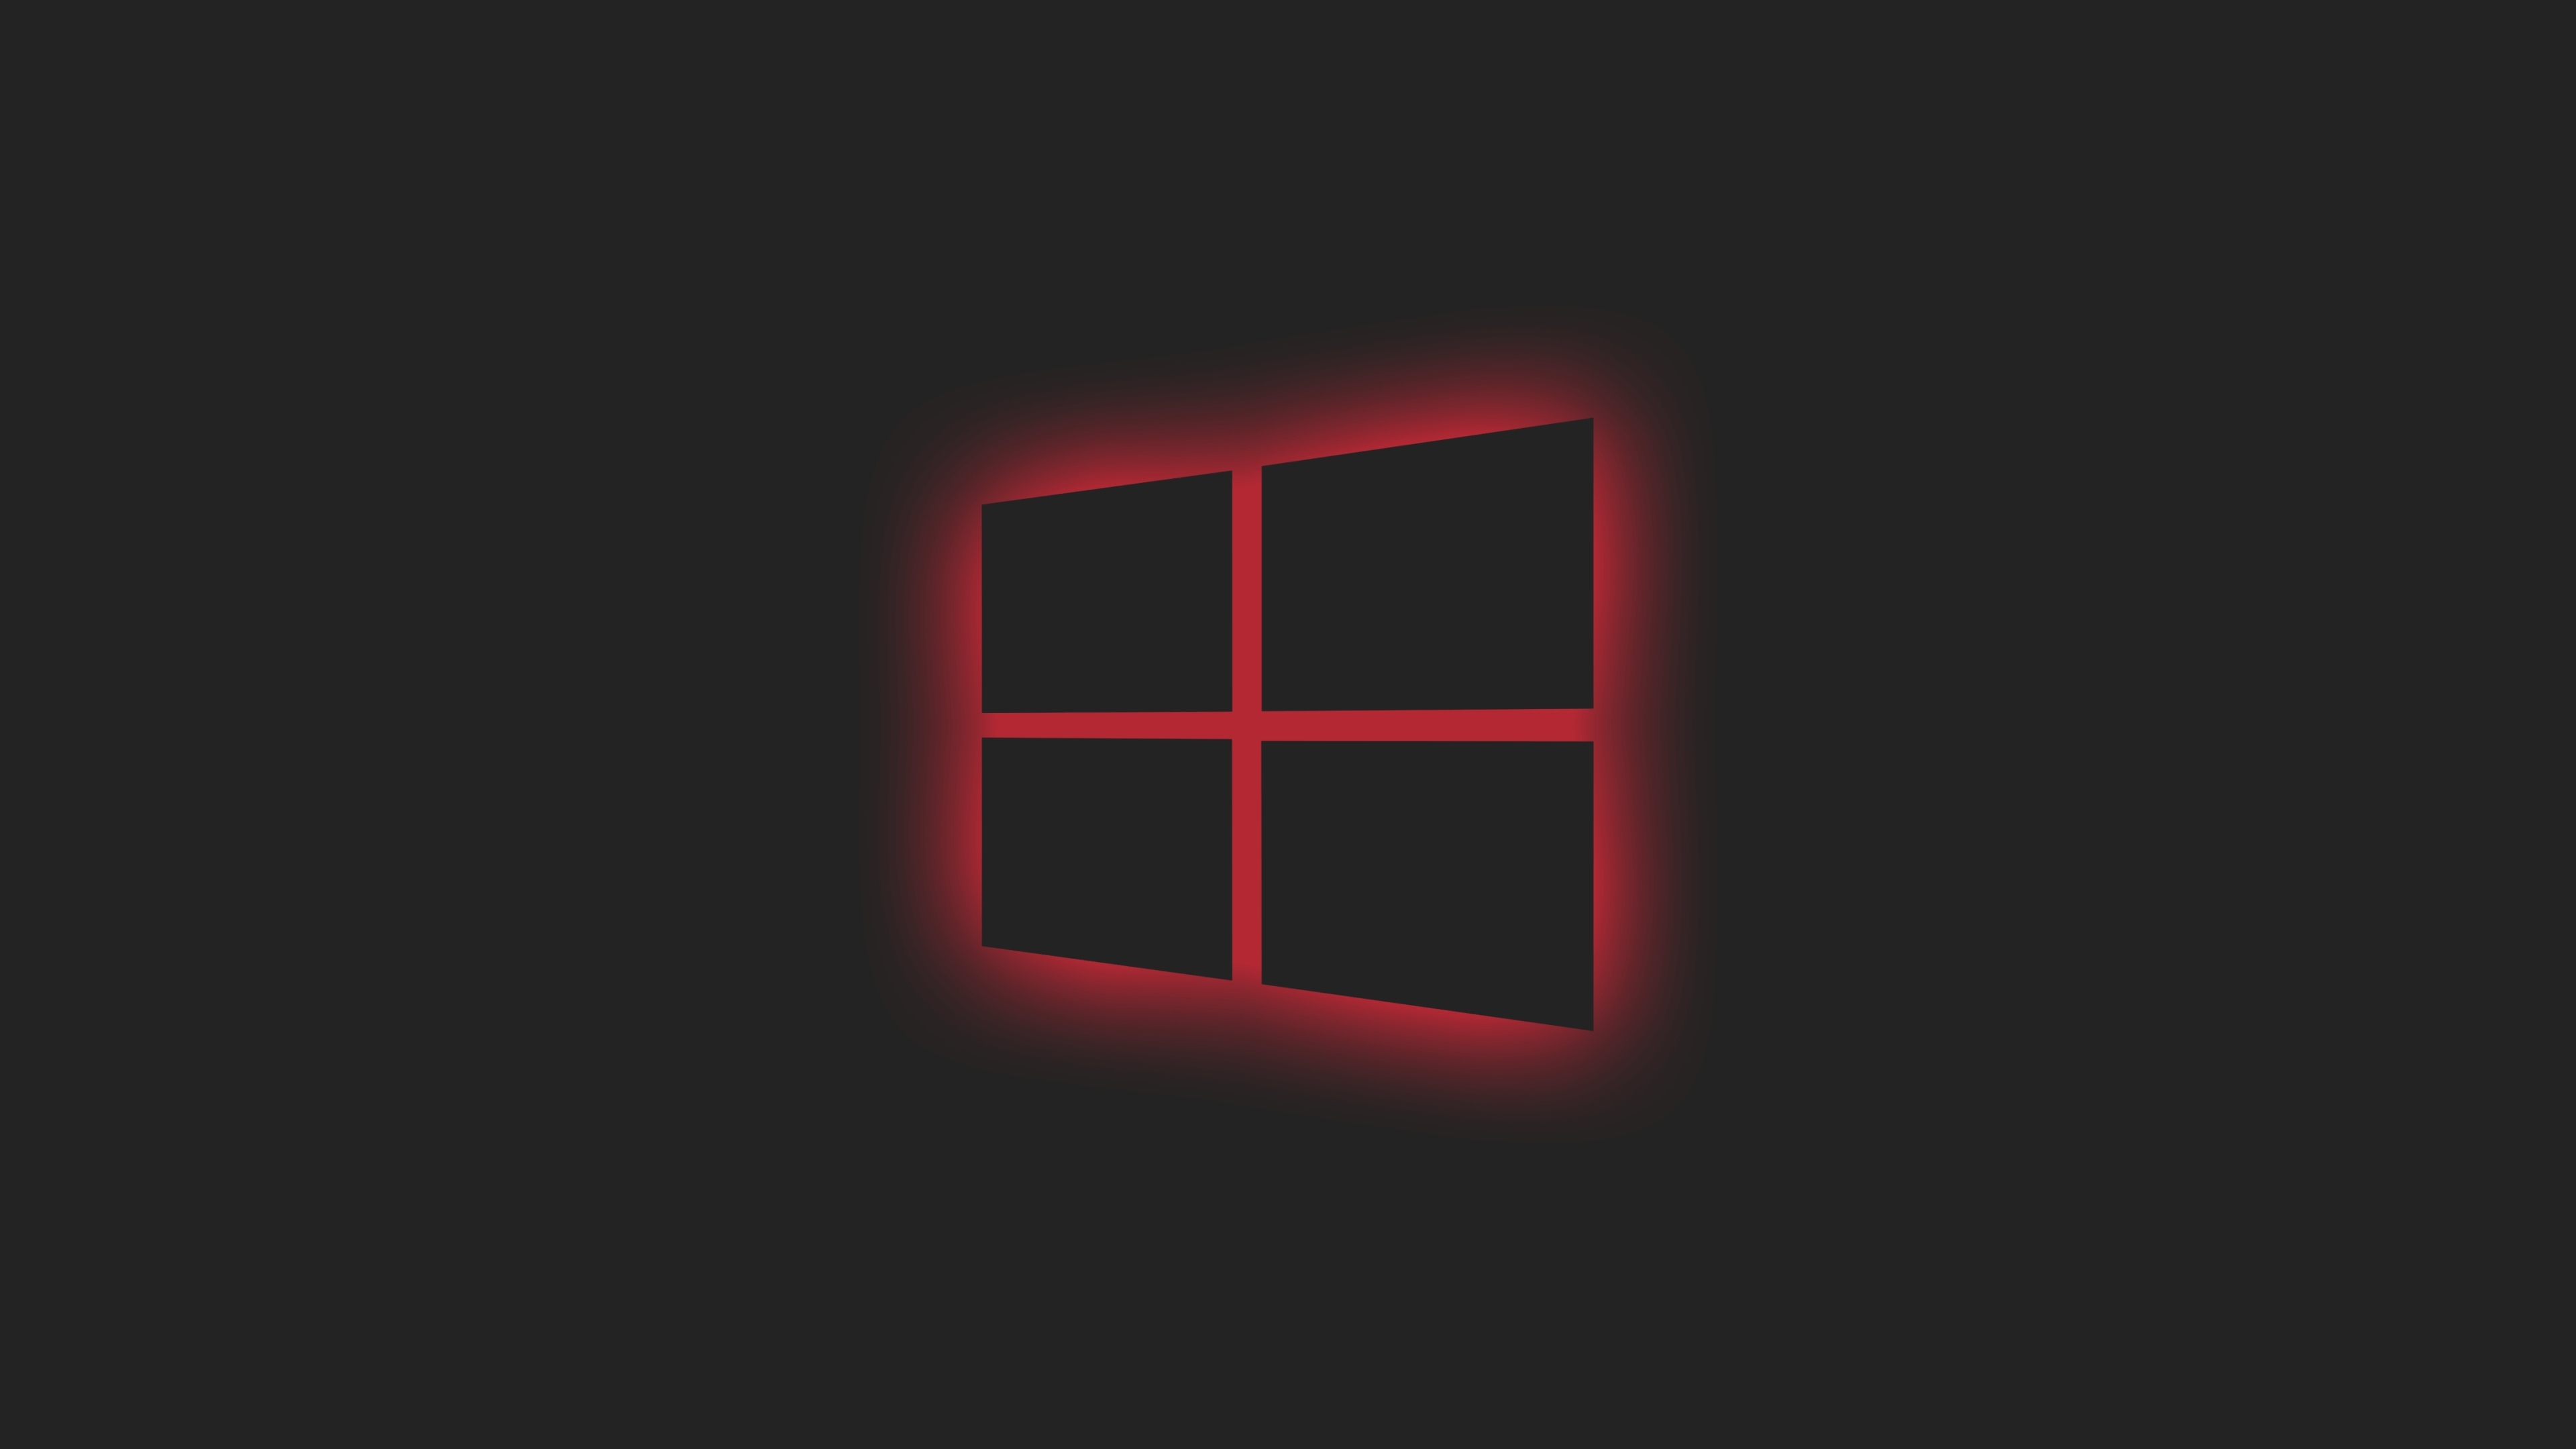 3840x2160 Windows 10 Logo Red Neon 4k Wallpaper Hd Hi Tech 4k Wallpapers Images Photos And Background Wallpapers Den